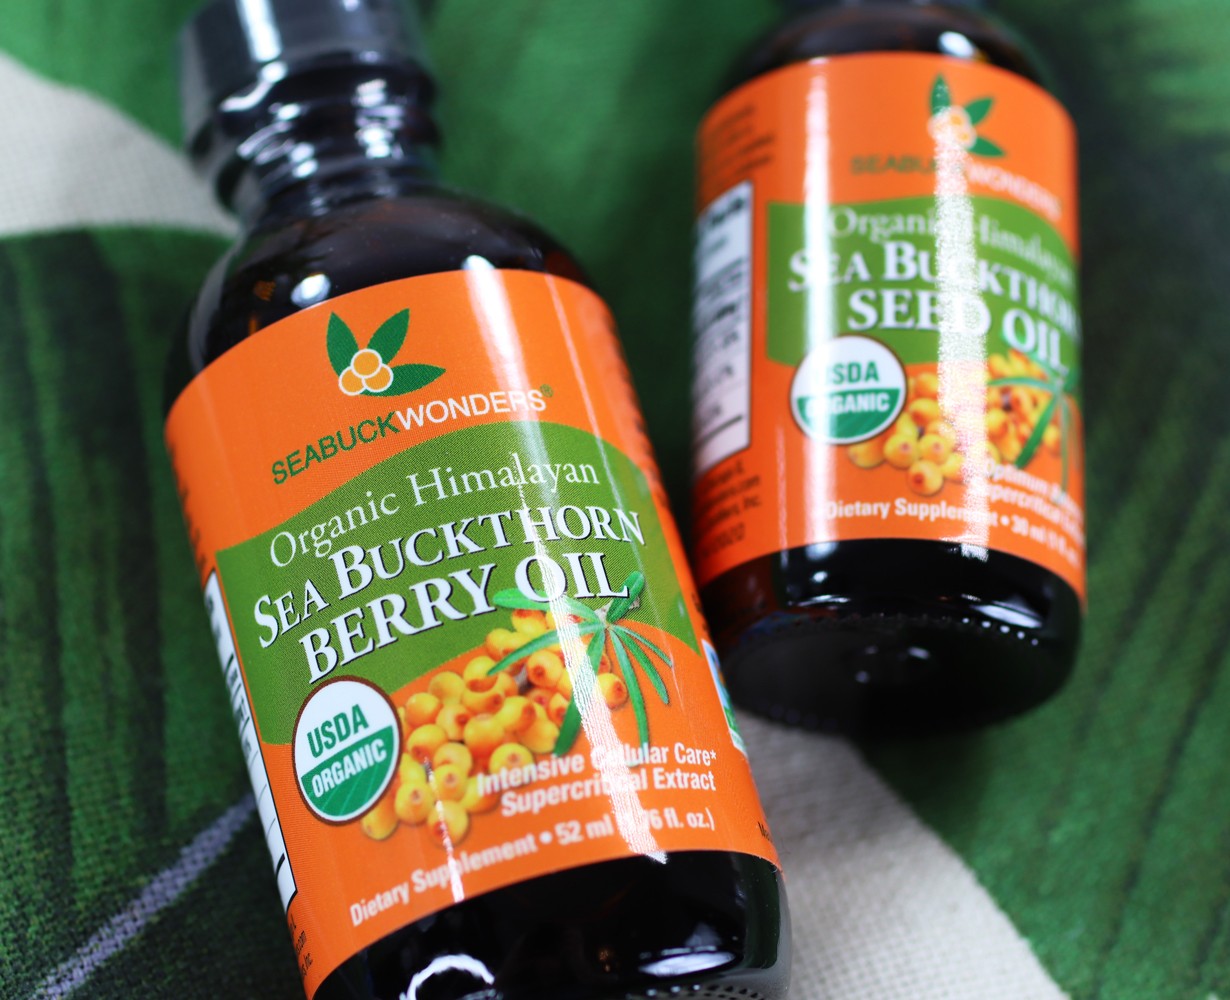 Sea buckthorn oil for hair and nail growth - I Found Supplements for Hair Growth That Really Work featured by popular Los Angeles cruelty free beauty blogger My Beauty Bunny